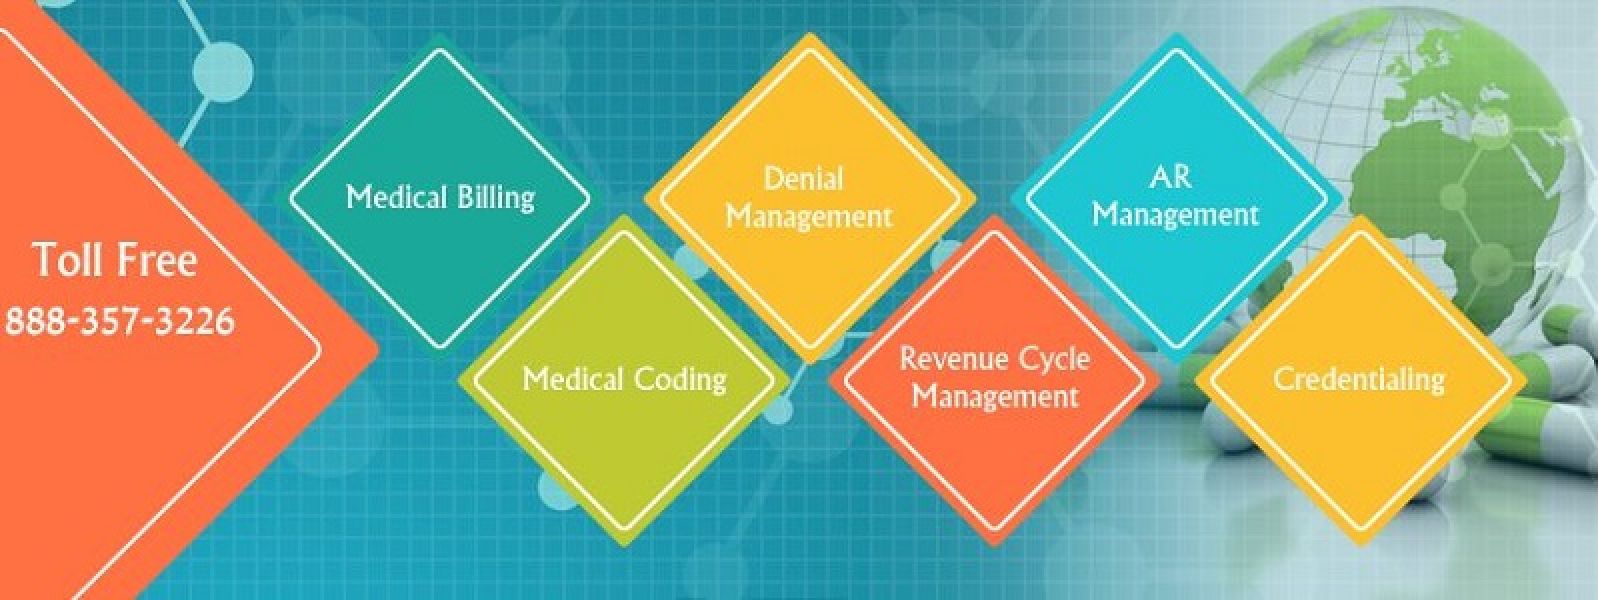 Medical Billing Services in KENTUCKY, KY